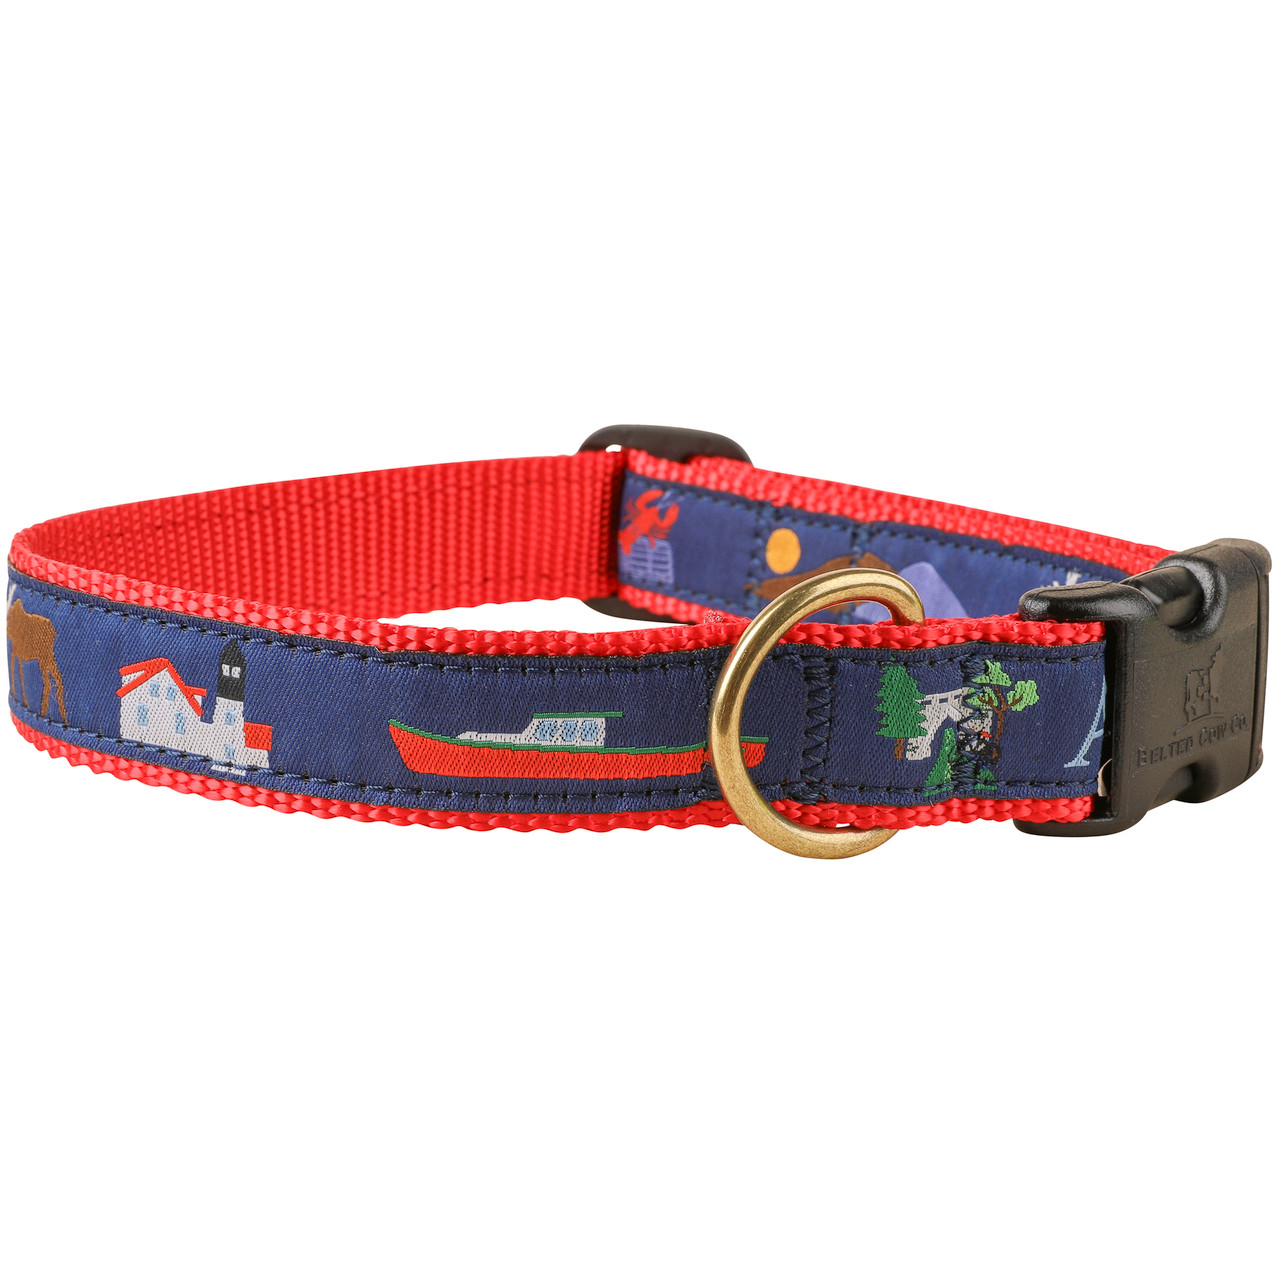 Acadia Dog Collar  1 Inch by Belted Cow Company. Maine In Maine